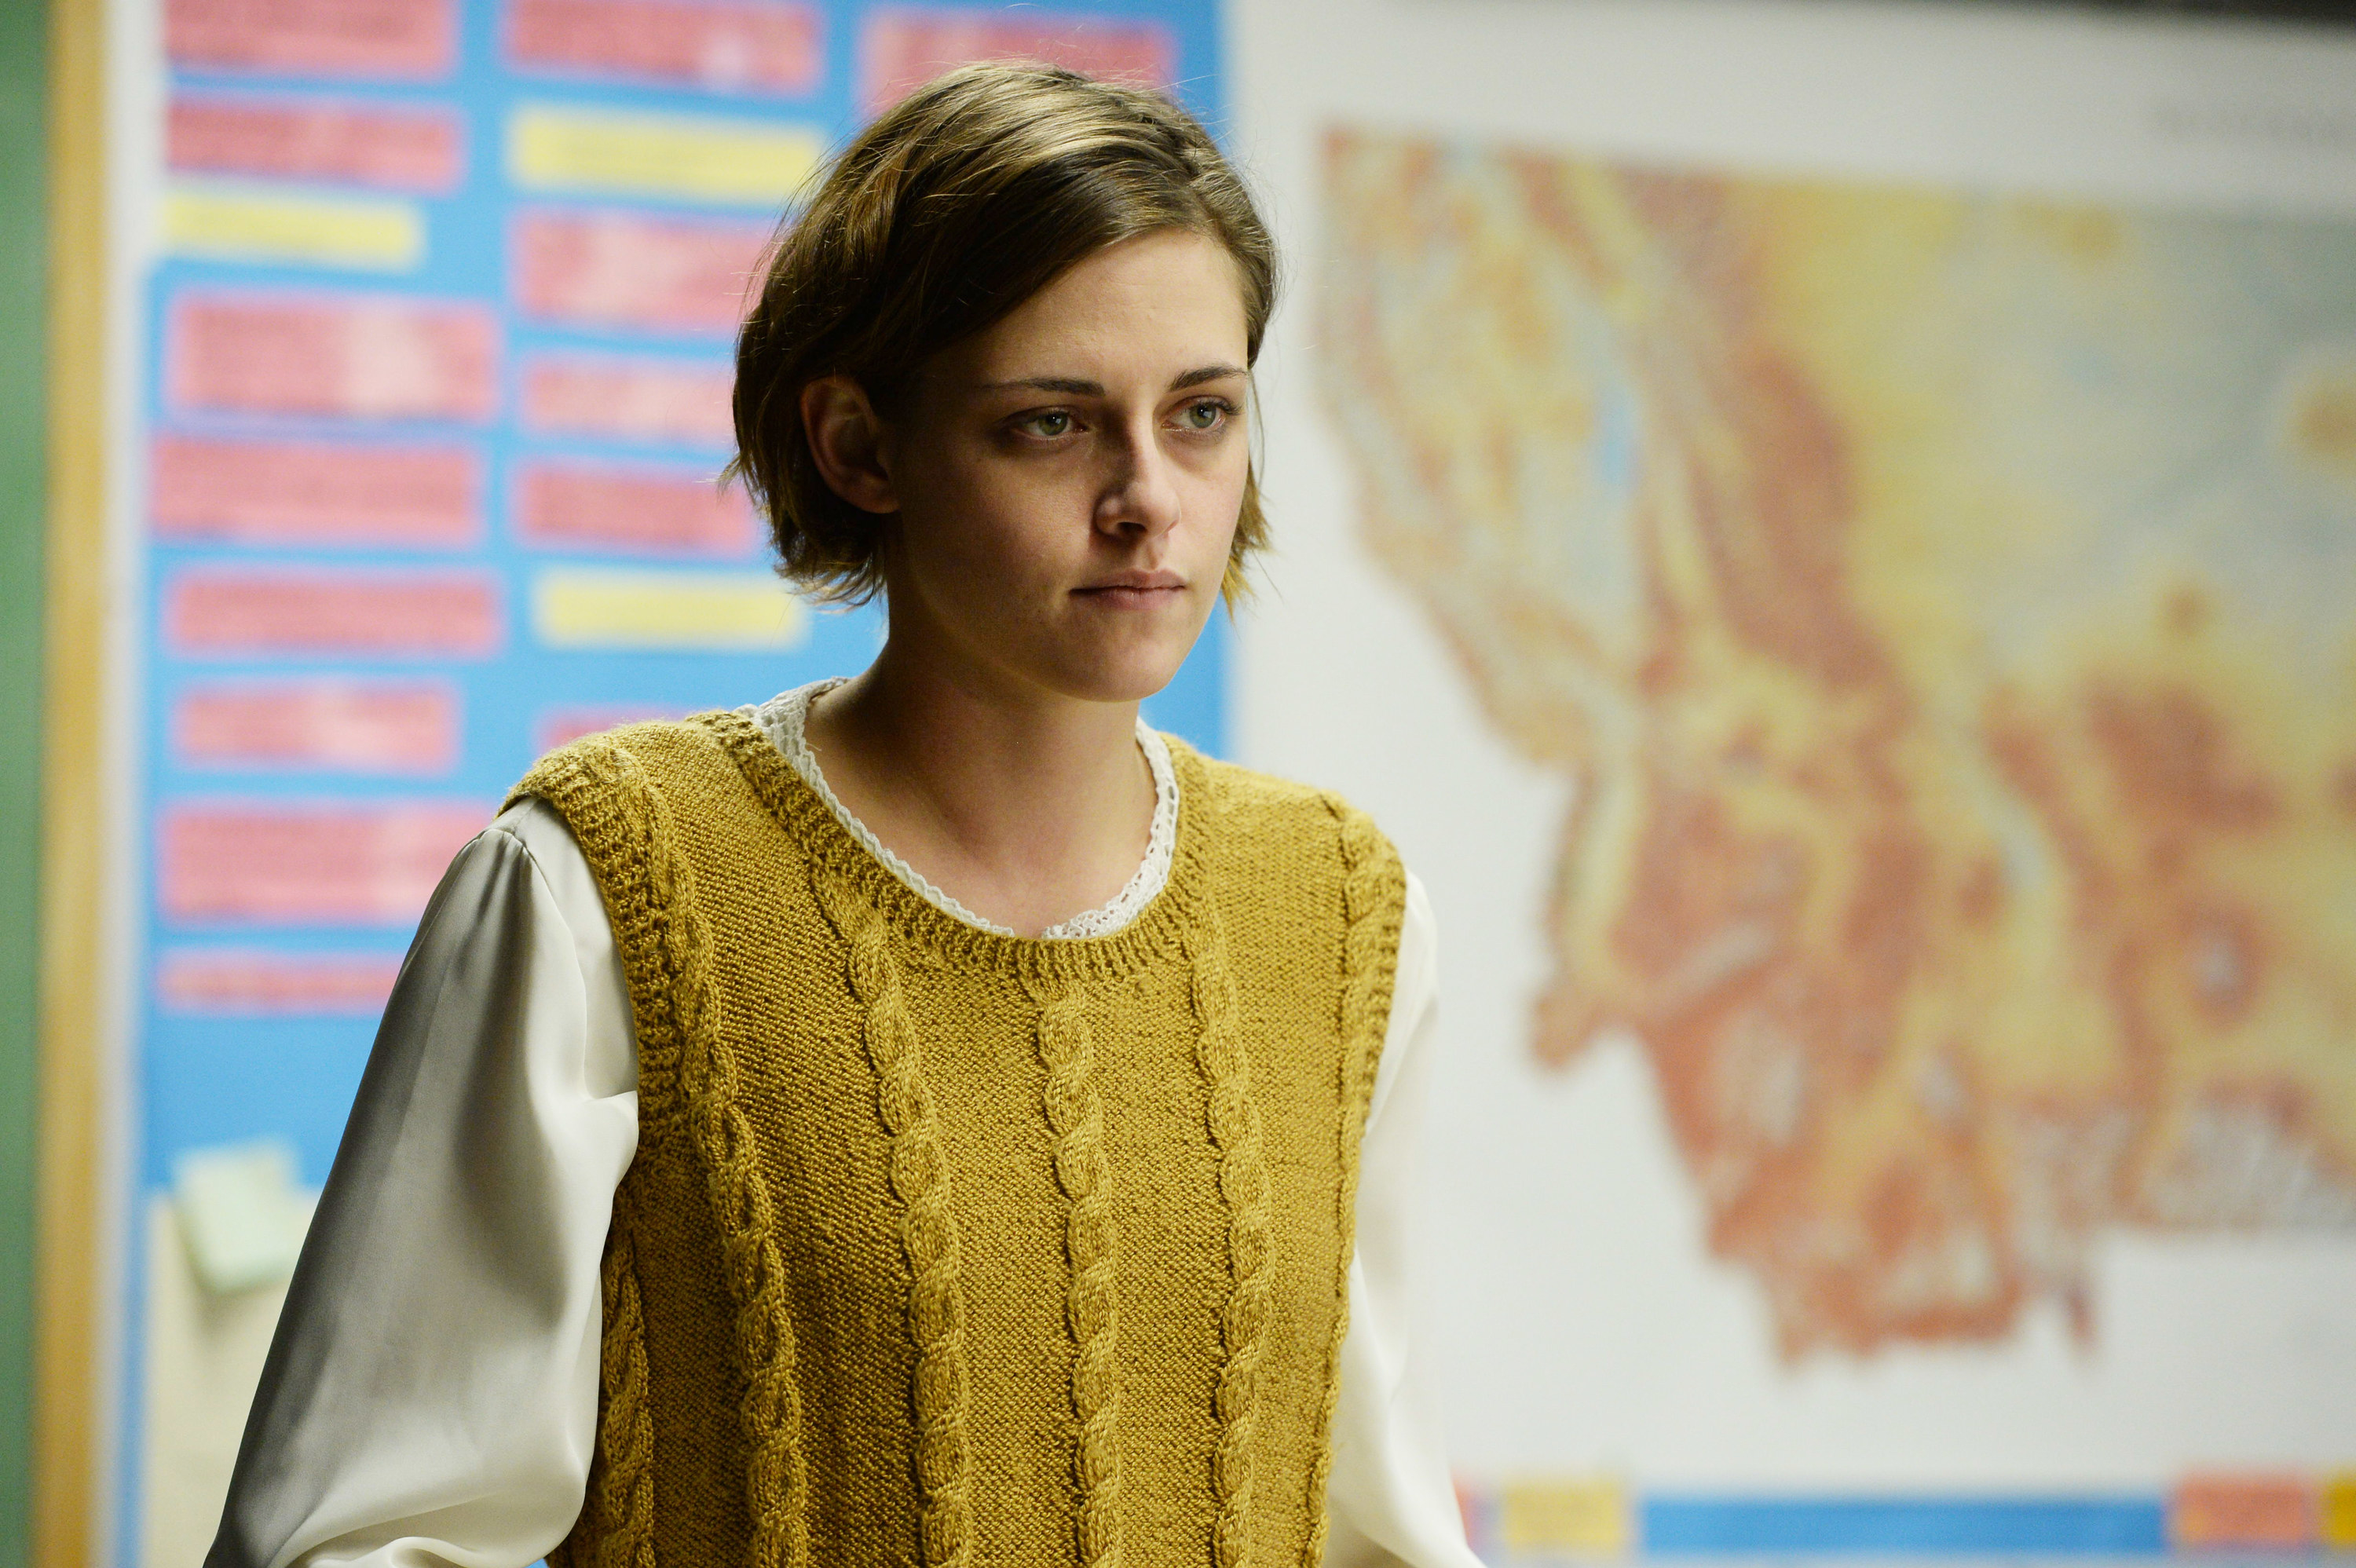 Kristen Stewart wearing a yellow vest in front of a map of Montana